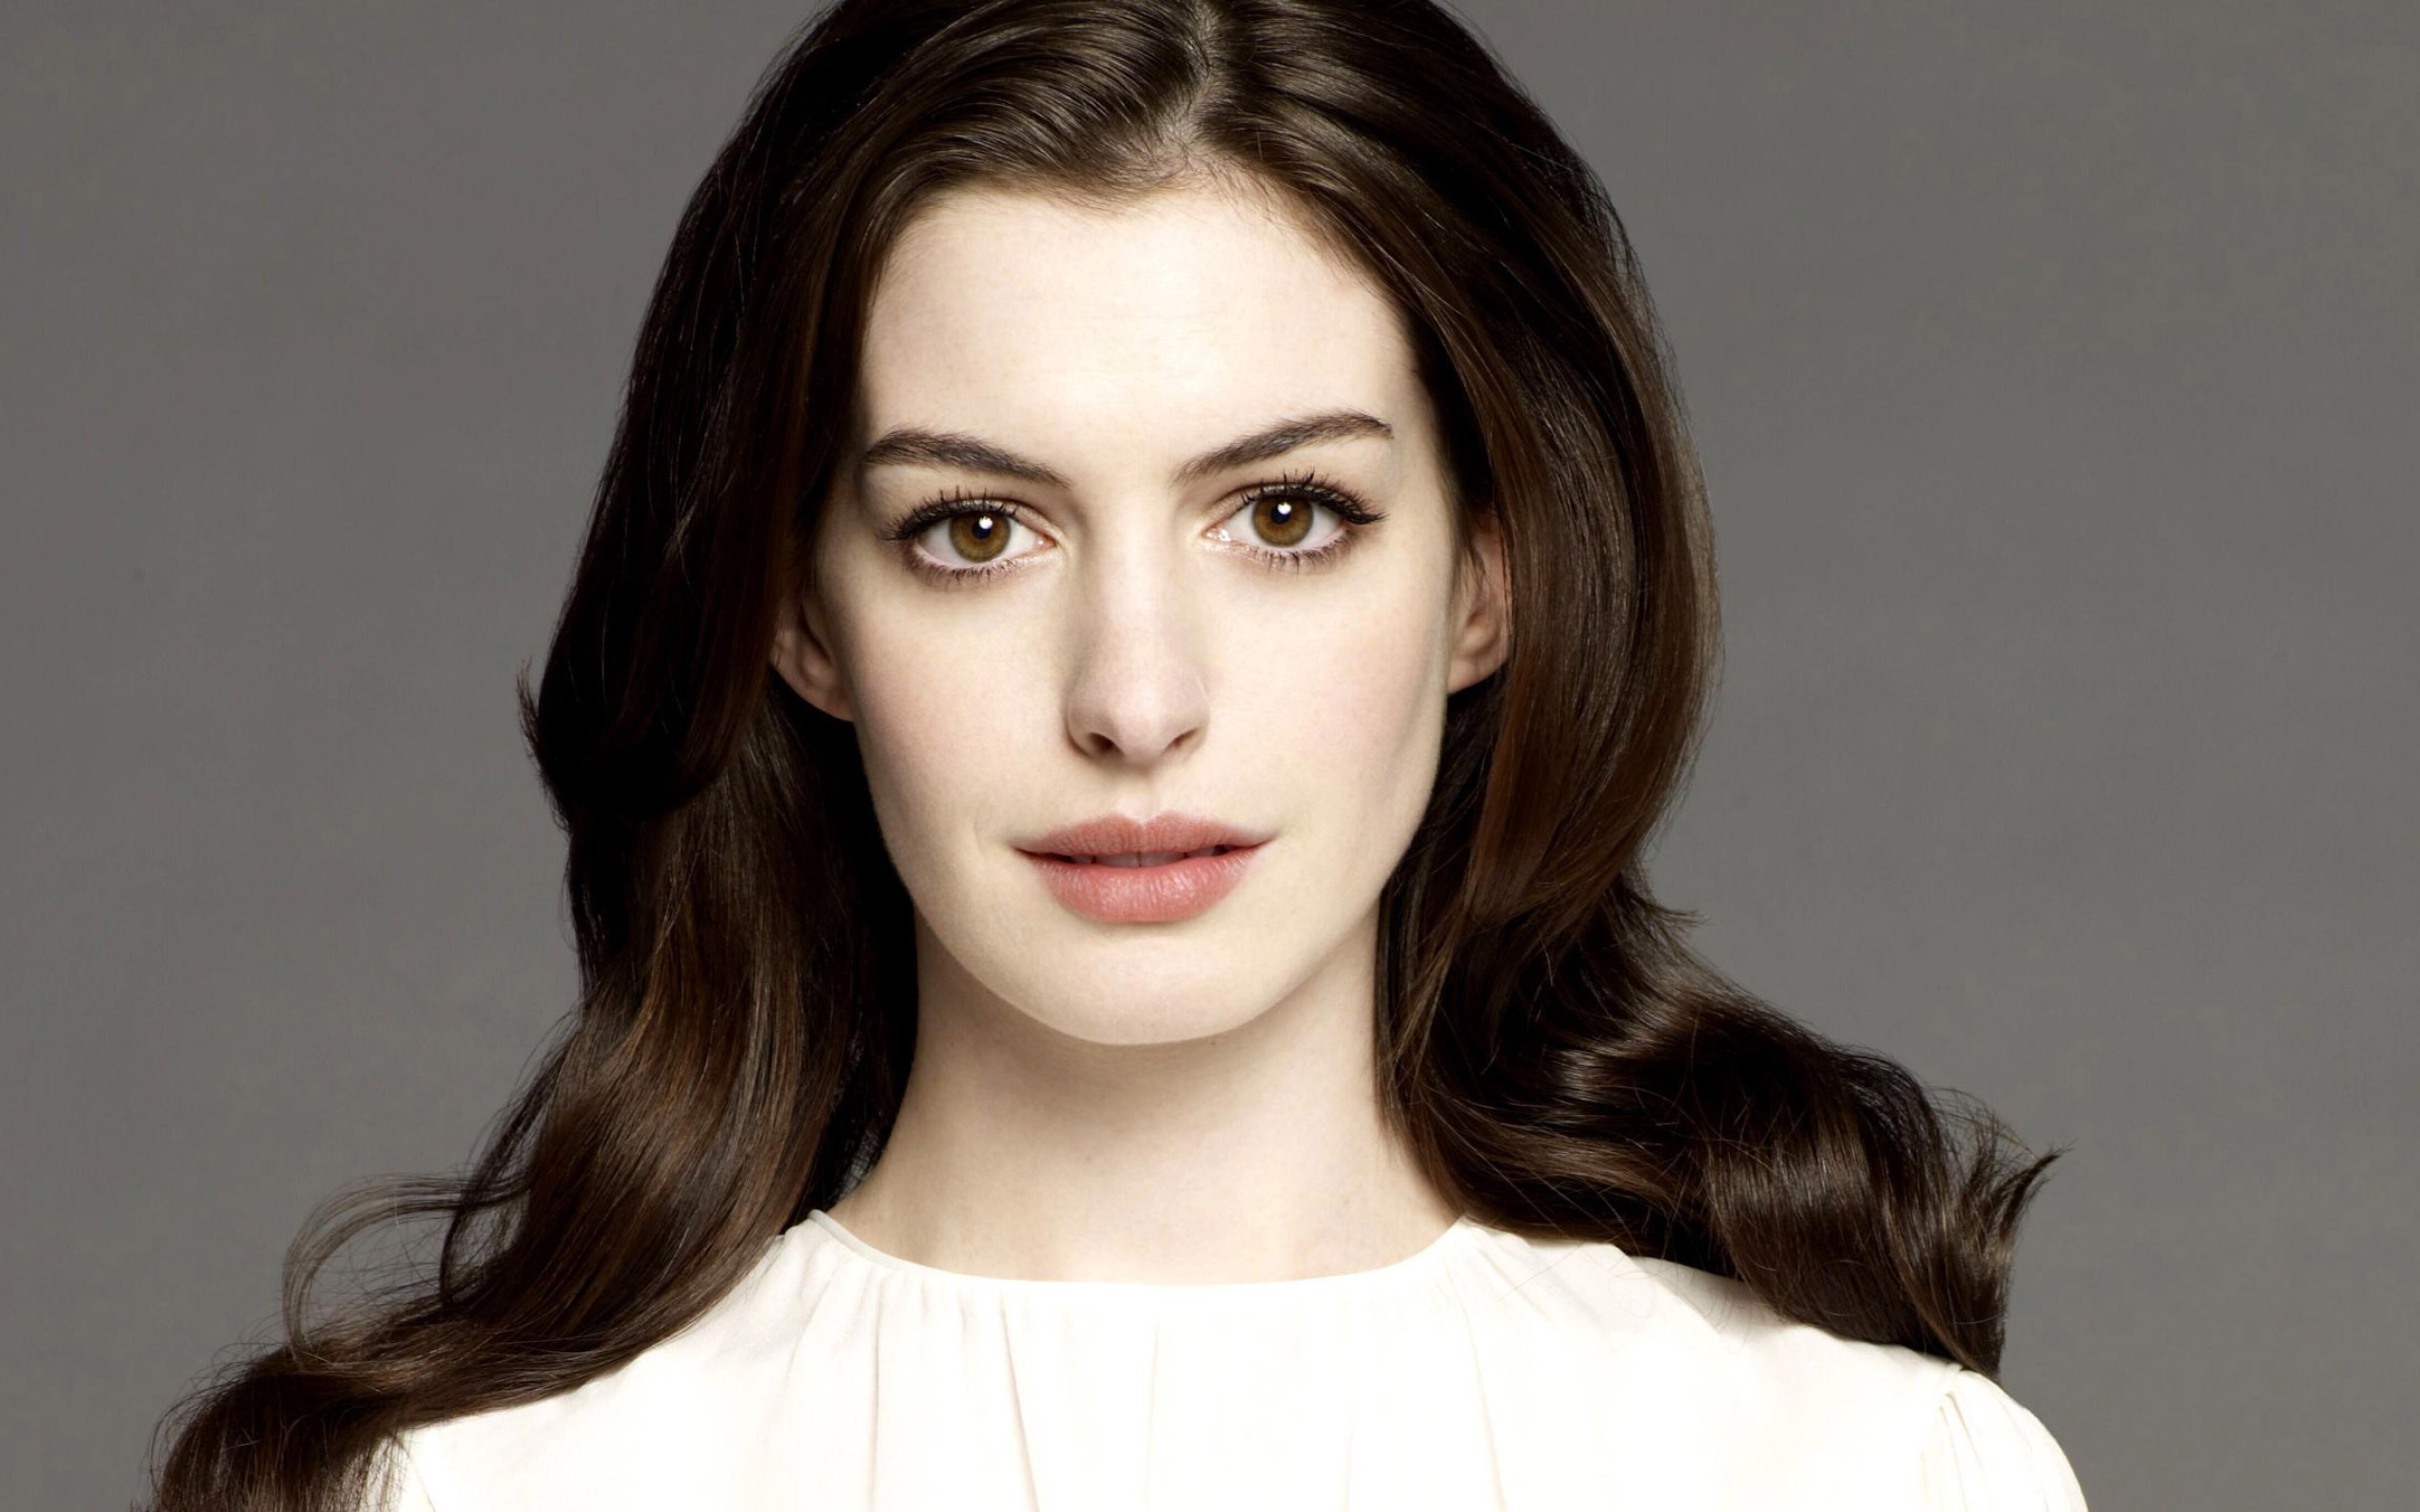 Anne Hathaway: Played Madeline Bray in a 2002 period comedy-drama film, Nicholas Nickleby. 2560x1600 HD Wallpaper.